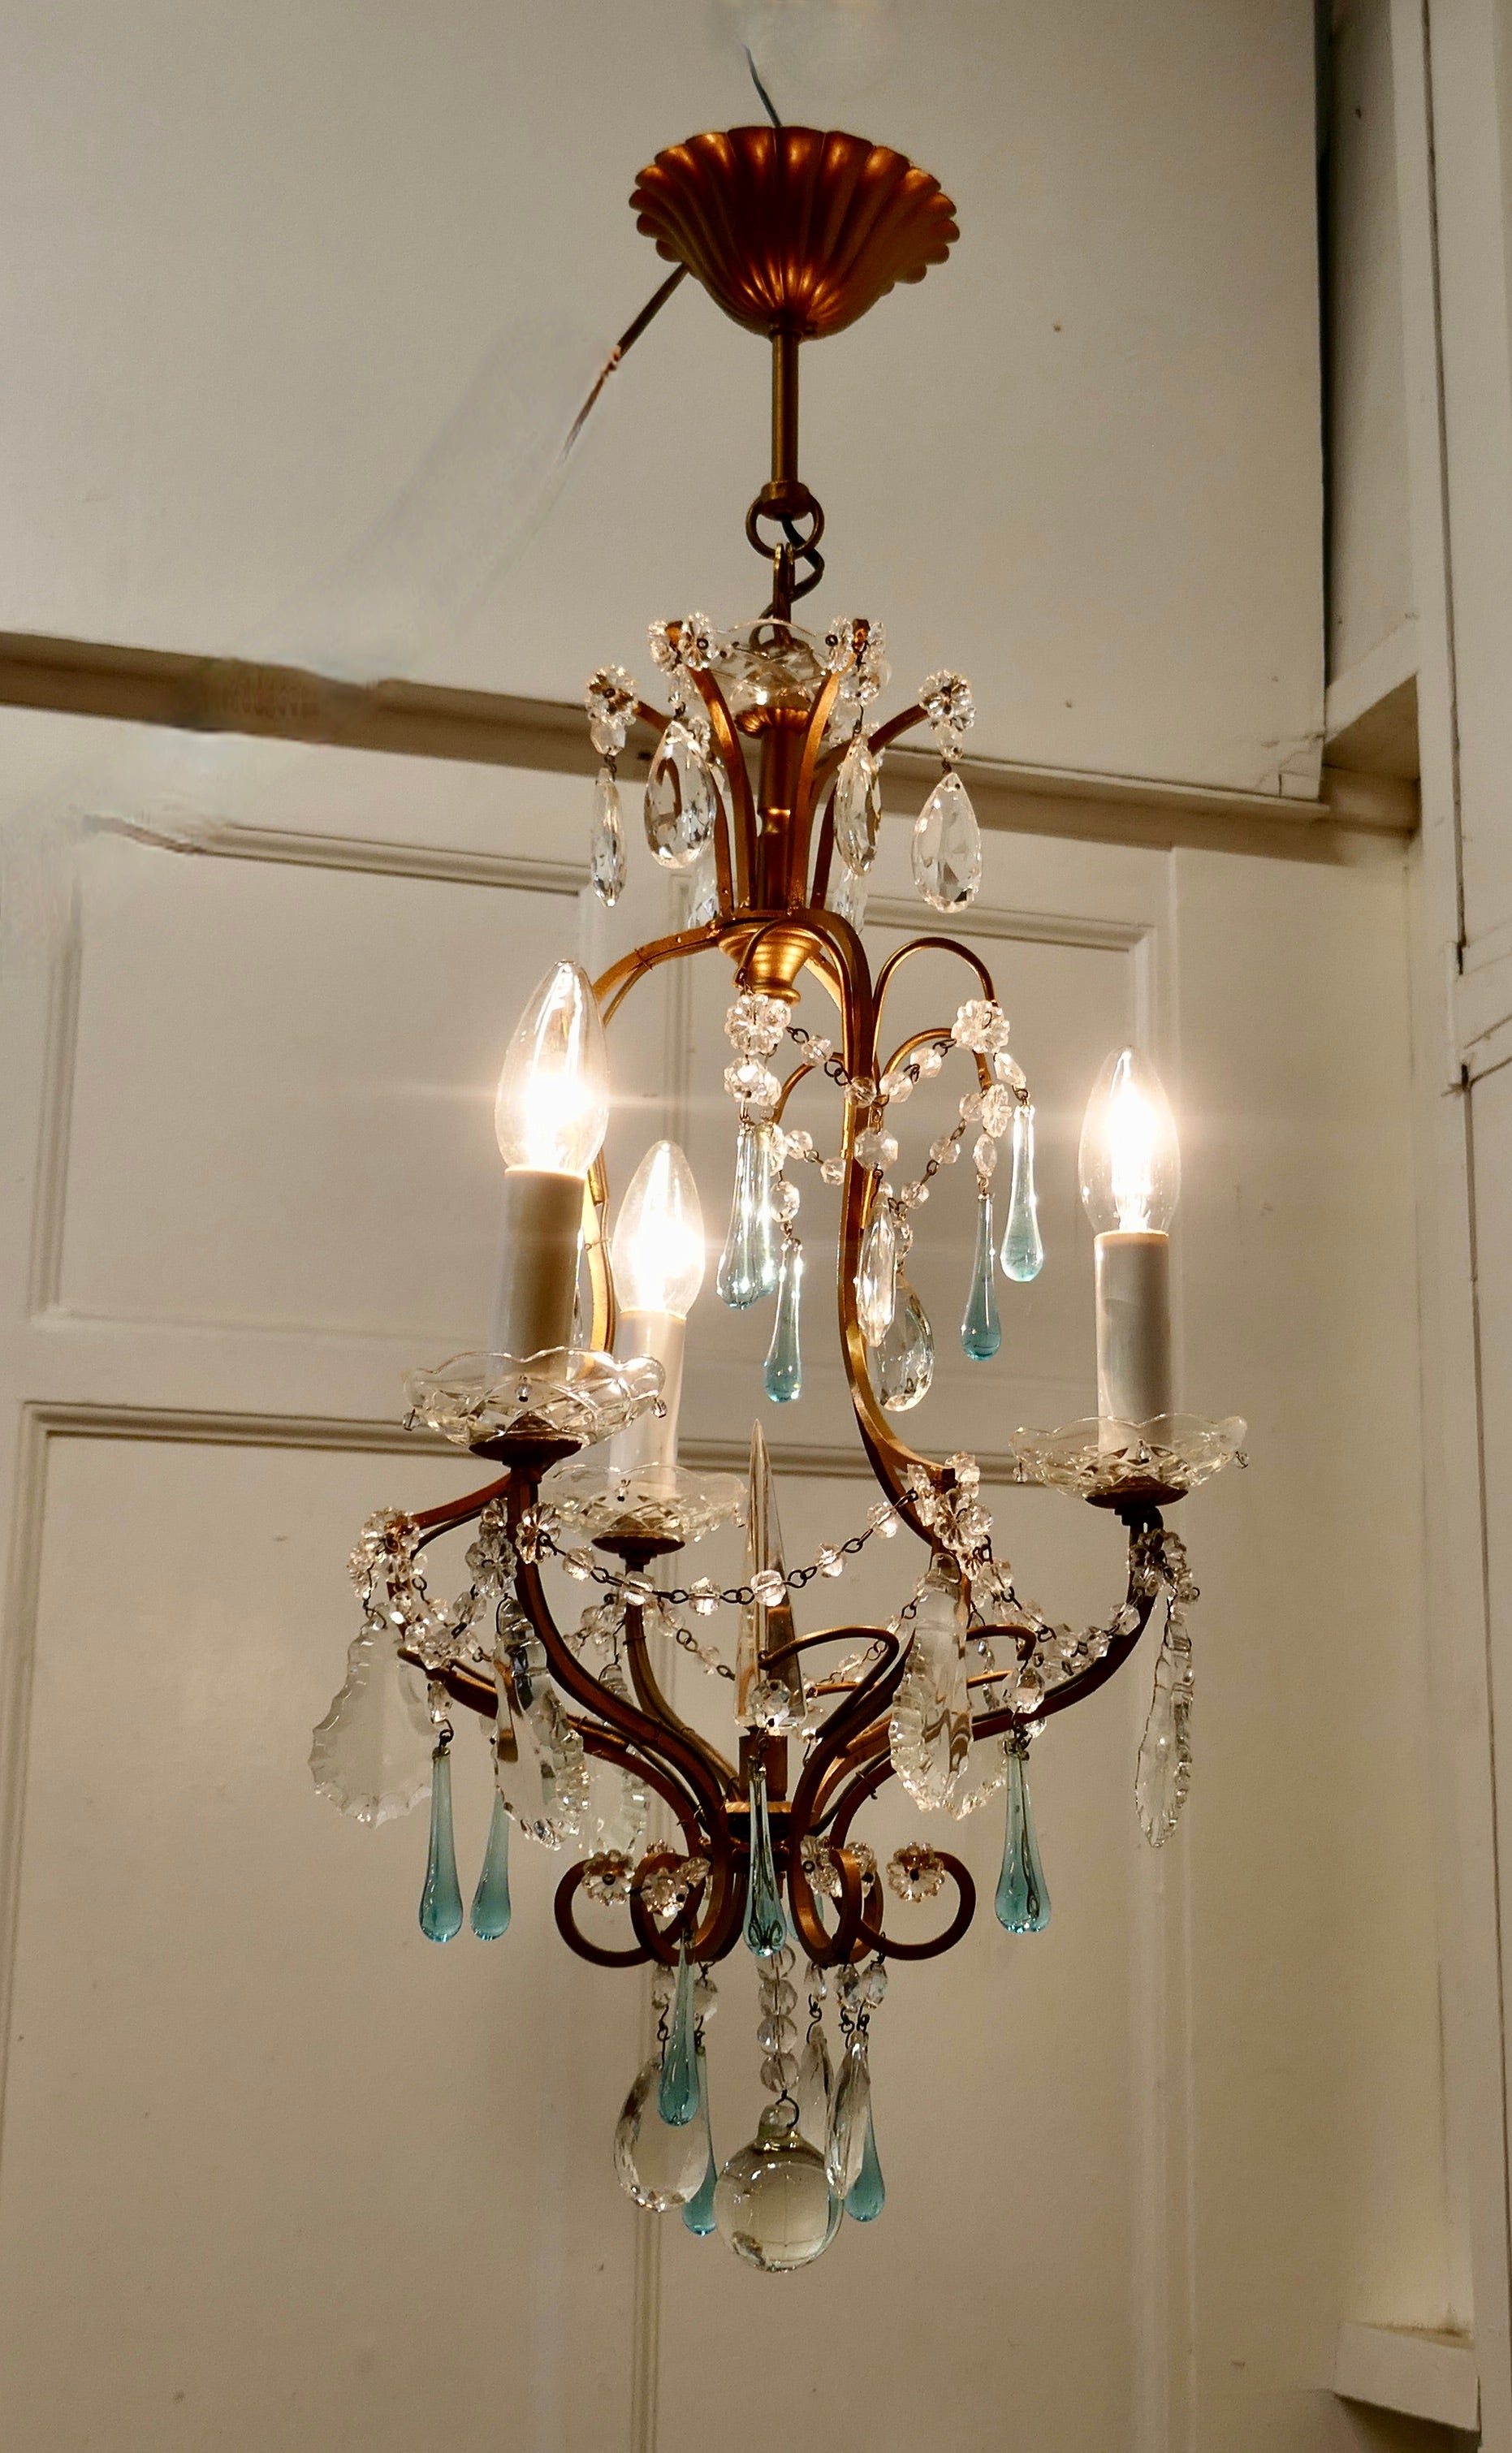 French Crystal Chandelier with Chains and Turquoise Drops

This is a very pretty and dainty piece, the brass has a gilded finish and 4 branches, the light is hung with beautiful Turquoise tear drops, and cut crystal flowers

The light is in good